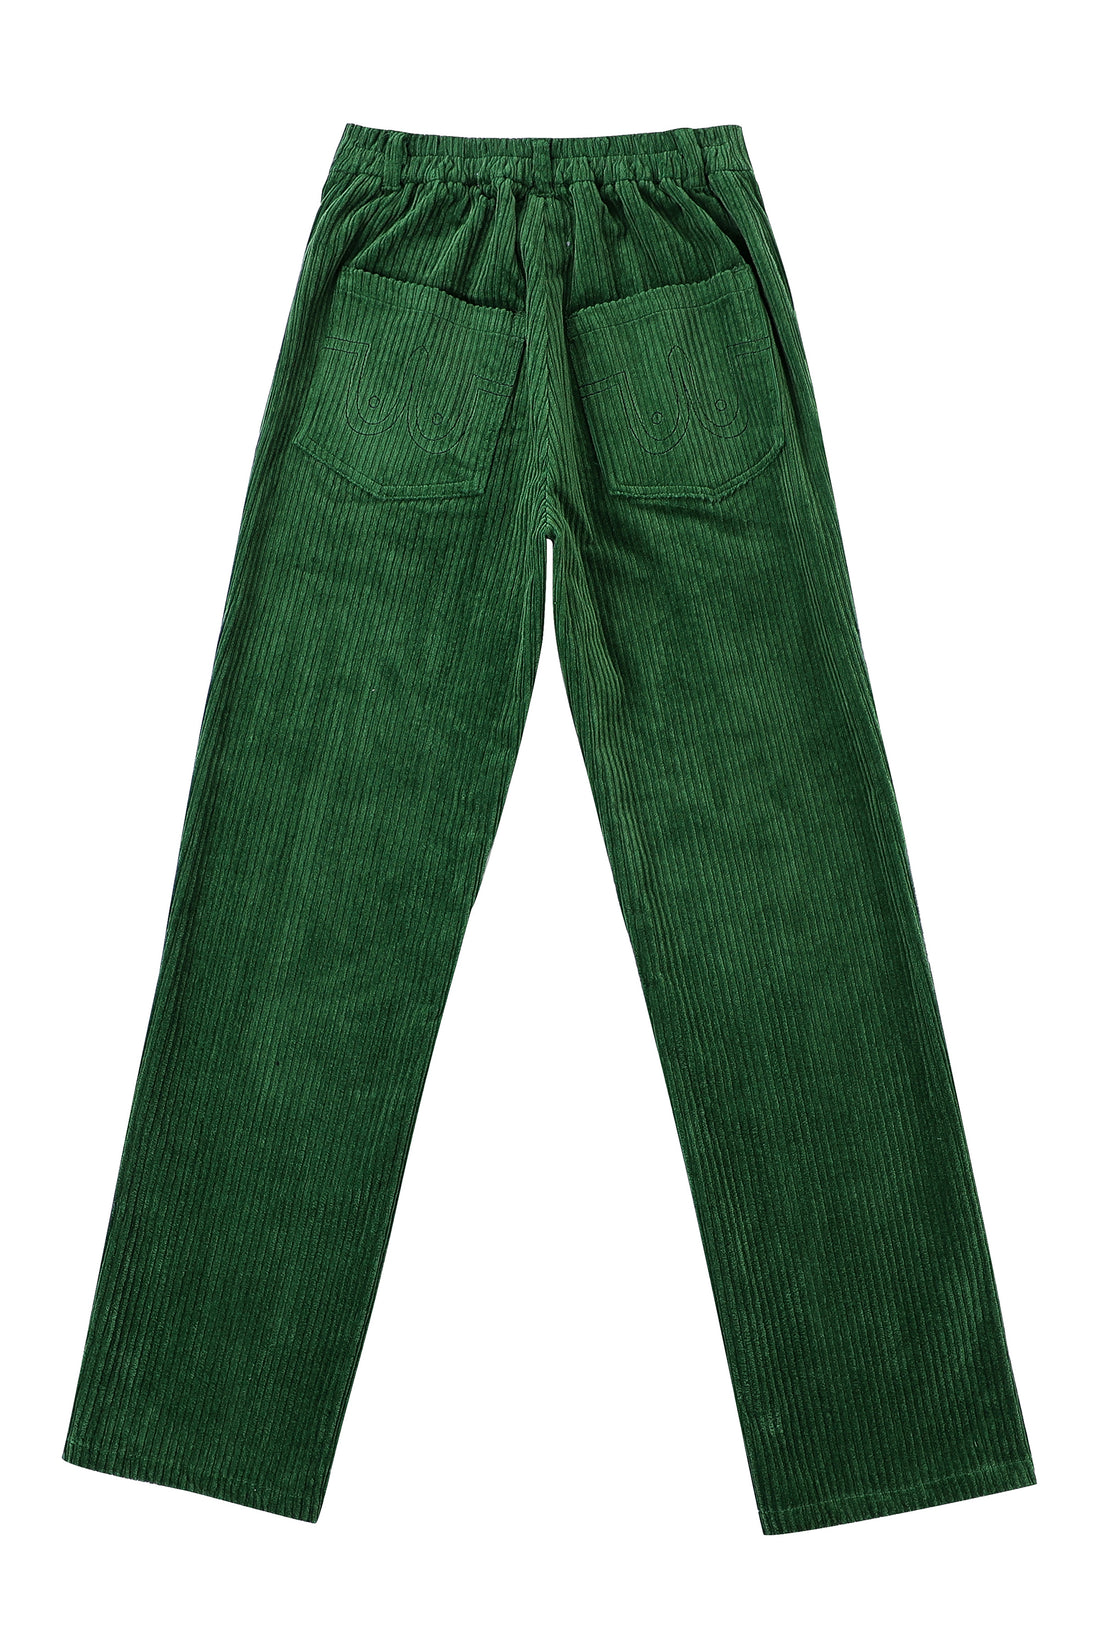 Poison Green Corduroy Comfort Trousers